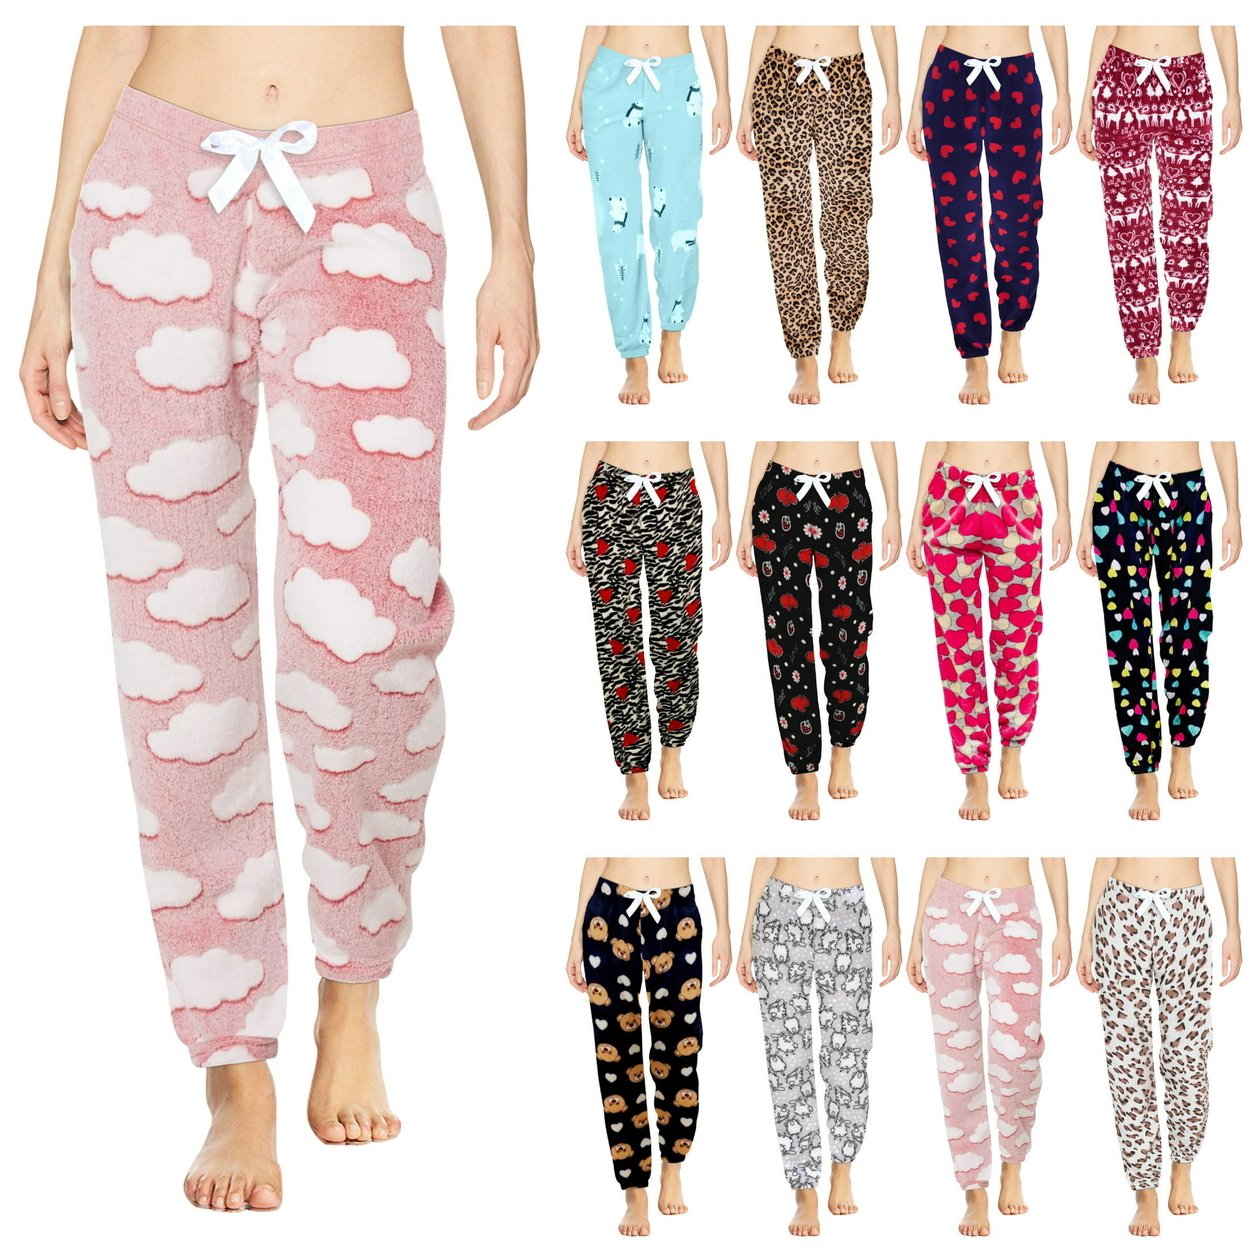 4-Pack: Women's Solid & Printed Ultra-Soft Comfy Stretch Micro-Fleece Pajama Lounge Pants - Xx-large, Love